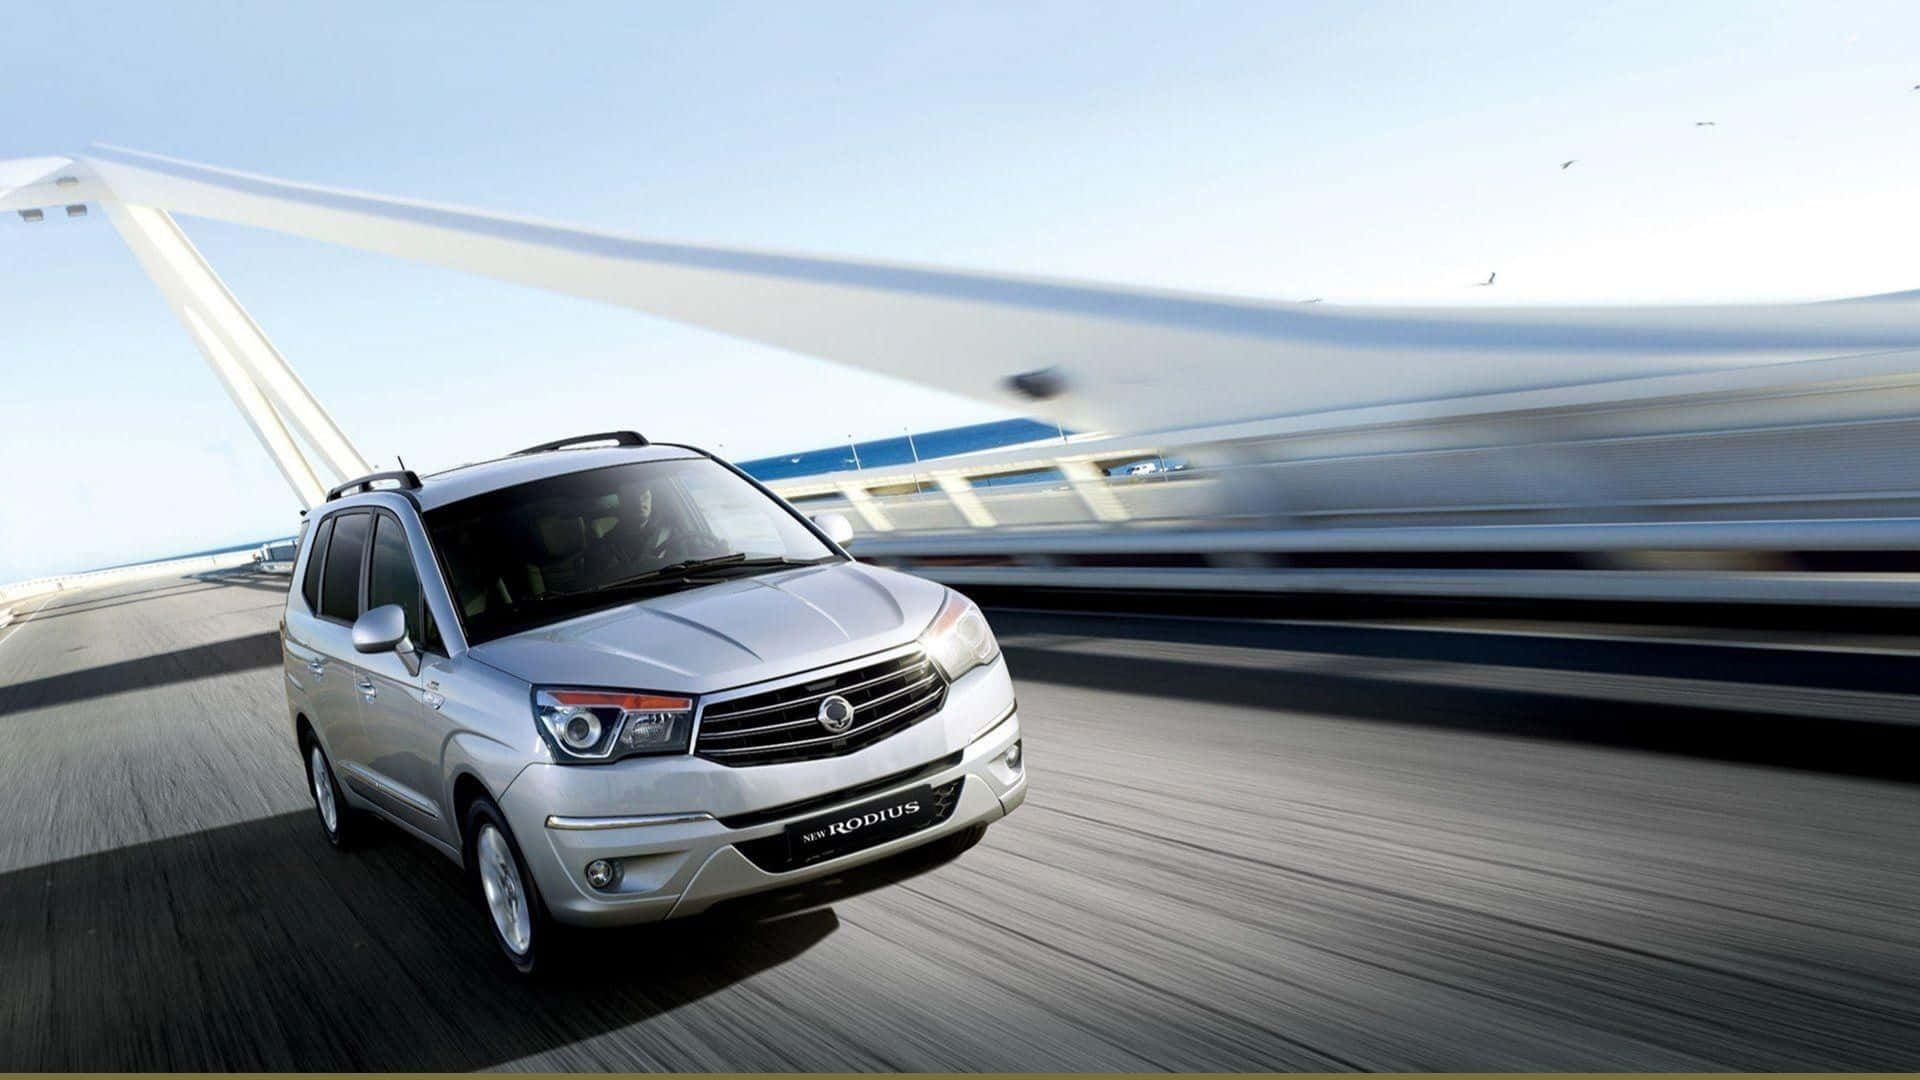 Stunning SsangYong SUV conquering the open road Wallpaper